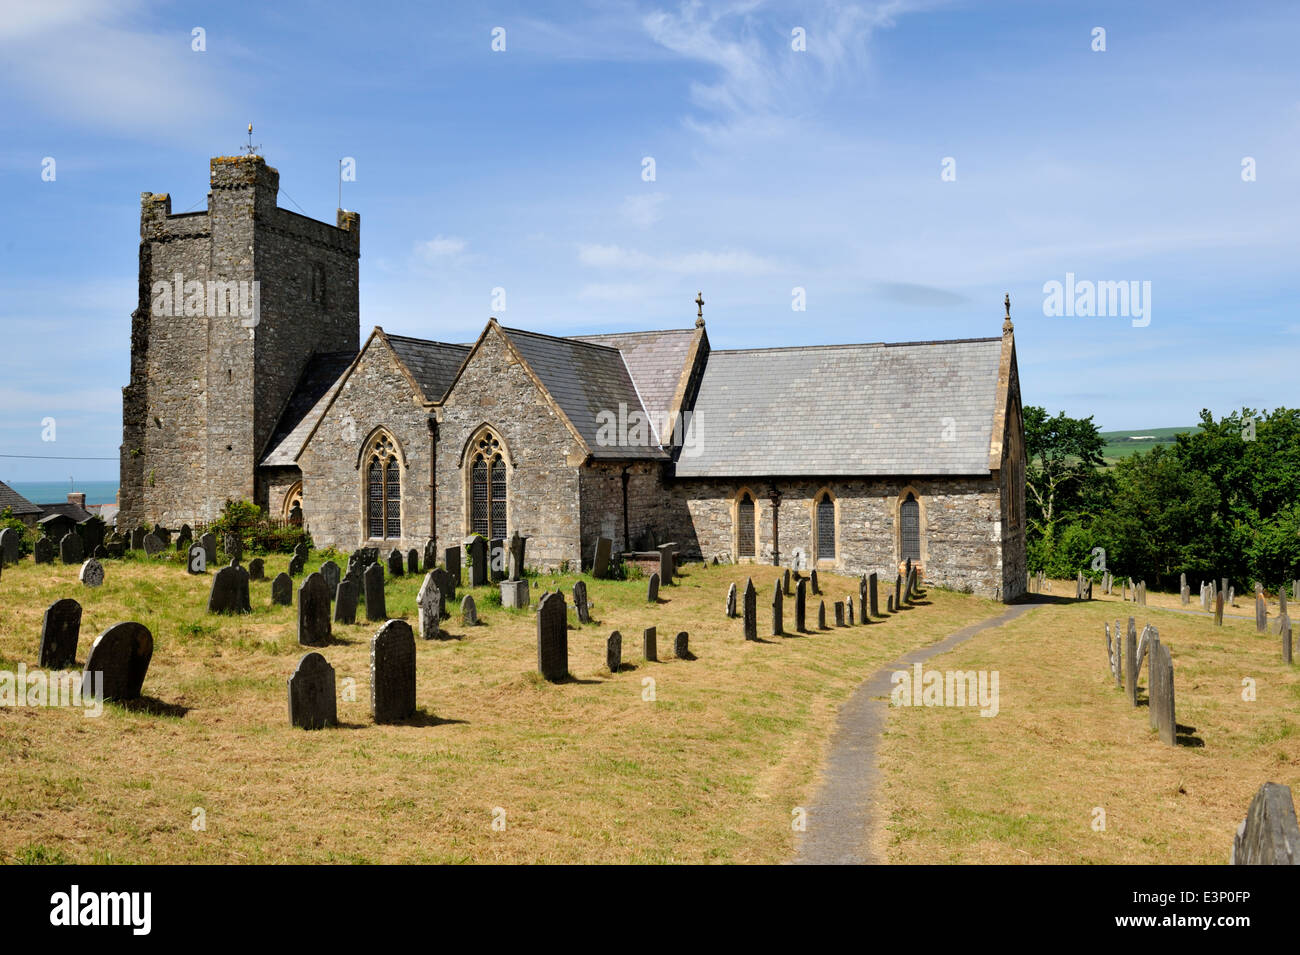 St Mary's church and old graveyard Newport, Pembrokeshire, West Wales Stock Photo